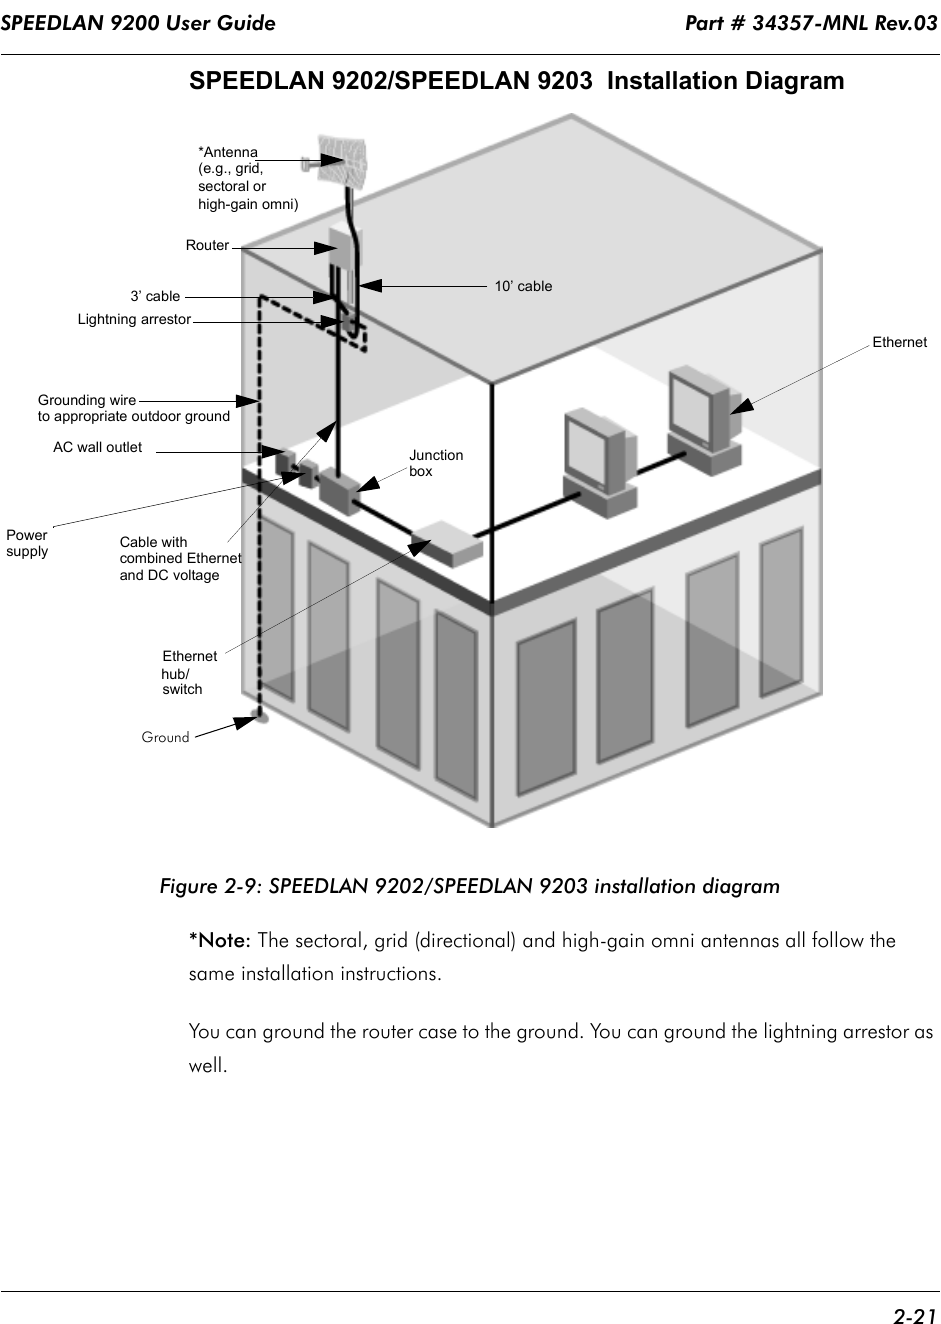 SPEEDLAN 9200 User Guide                                                                   Part # 34357-MNL Rev.03      2-21                                                                                                                                                              SPEEDLAN 9202/SPEEDLAN 9203  Installation Diagram Figure 2-9: SPEEDLAN 9202/SPEEDLAN 9203 installation diagram *Note: The sectoral, grid (directional) and high-gain omni antennas all follow the same installation instructions.You can ground the router case to the ground. You can ground the lightning arrestor as well.  Router 3’ cableLightning arrestorGrounding wireAC wall outletEthernetEthernet 10’ cable*Antenna (e.g., grid,JunctionboxCable with combined Ethernetand DC voltagesectoral orhigh-gain omni)hub/switchPowersupplyGroundto appropriate outdoor ground